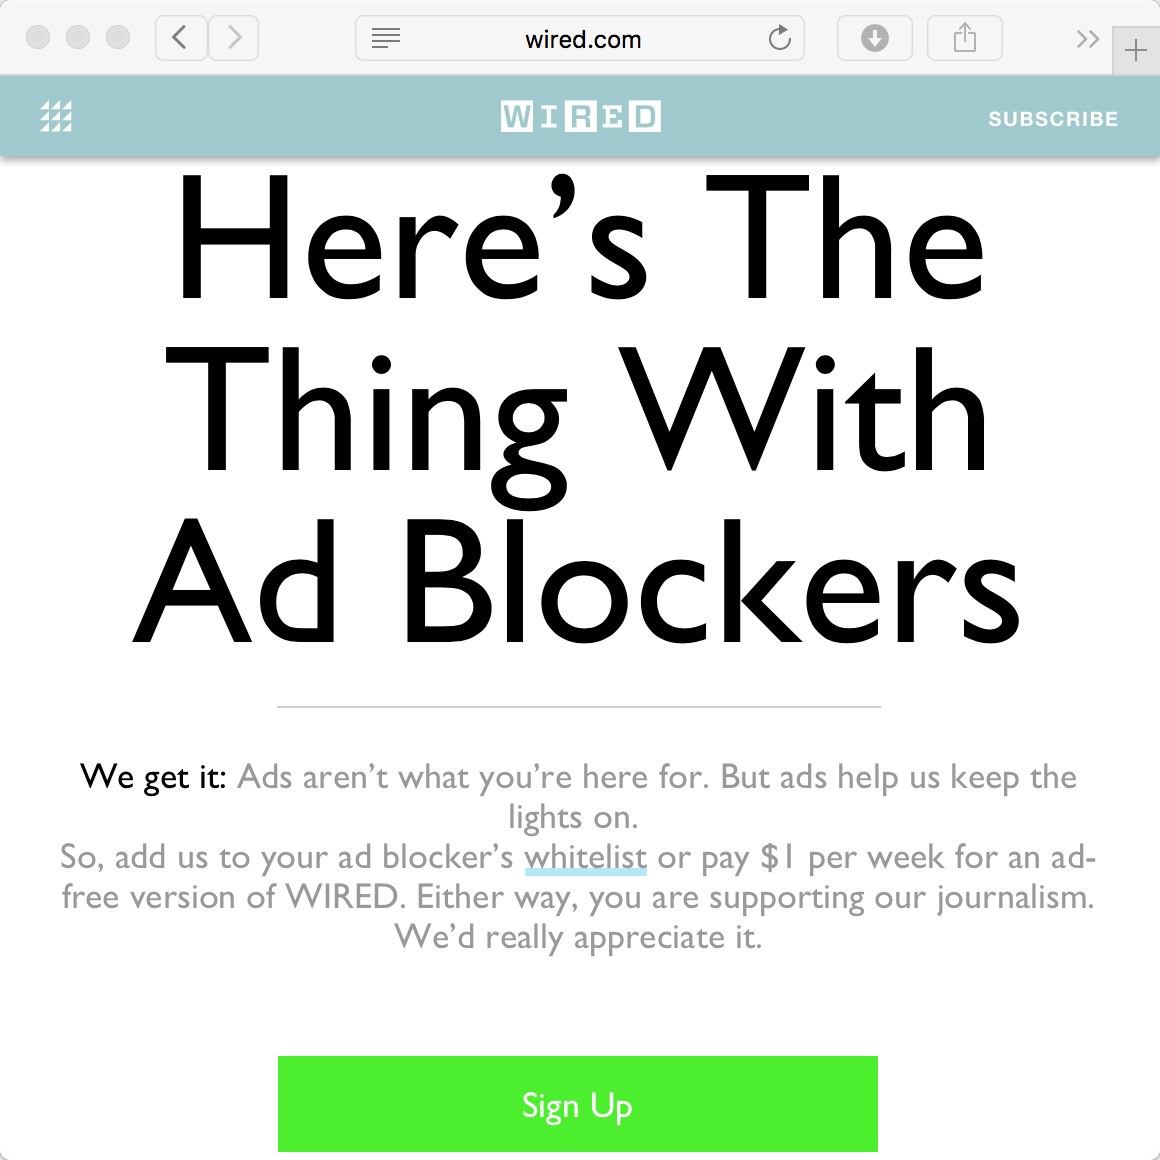 Screenshot of Wired’s doorslam that blocks access unless you turn off your tracker blocker.